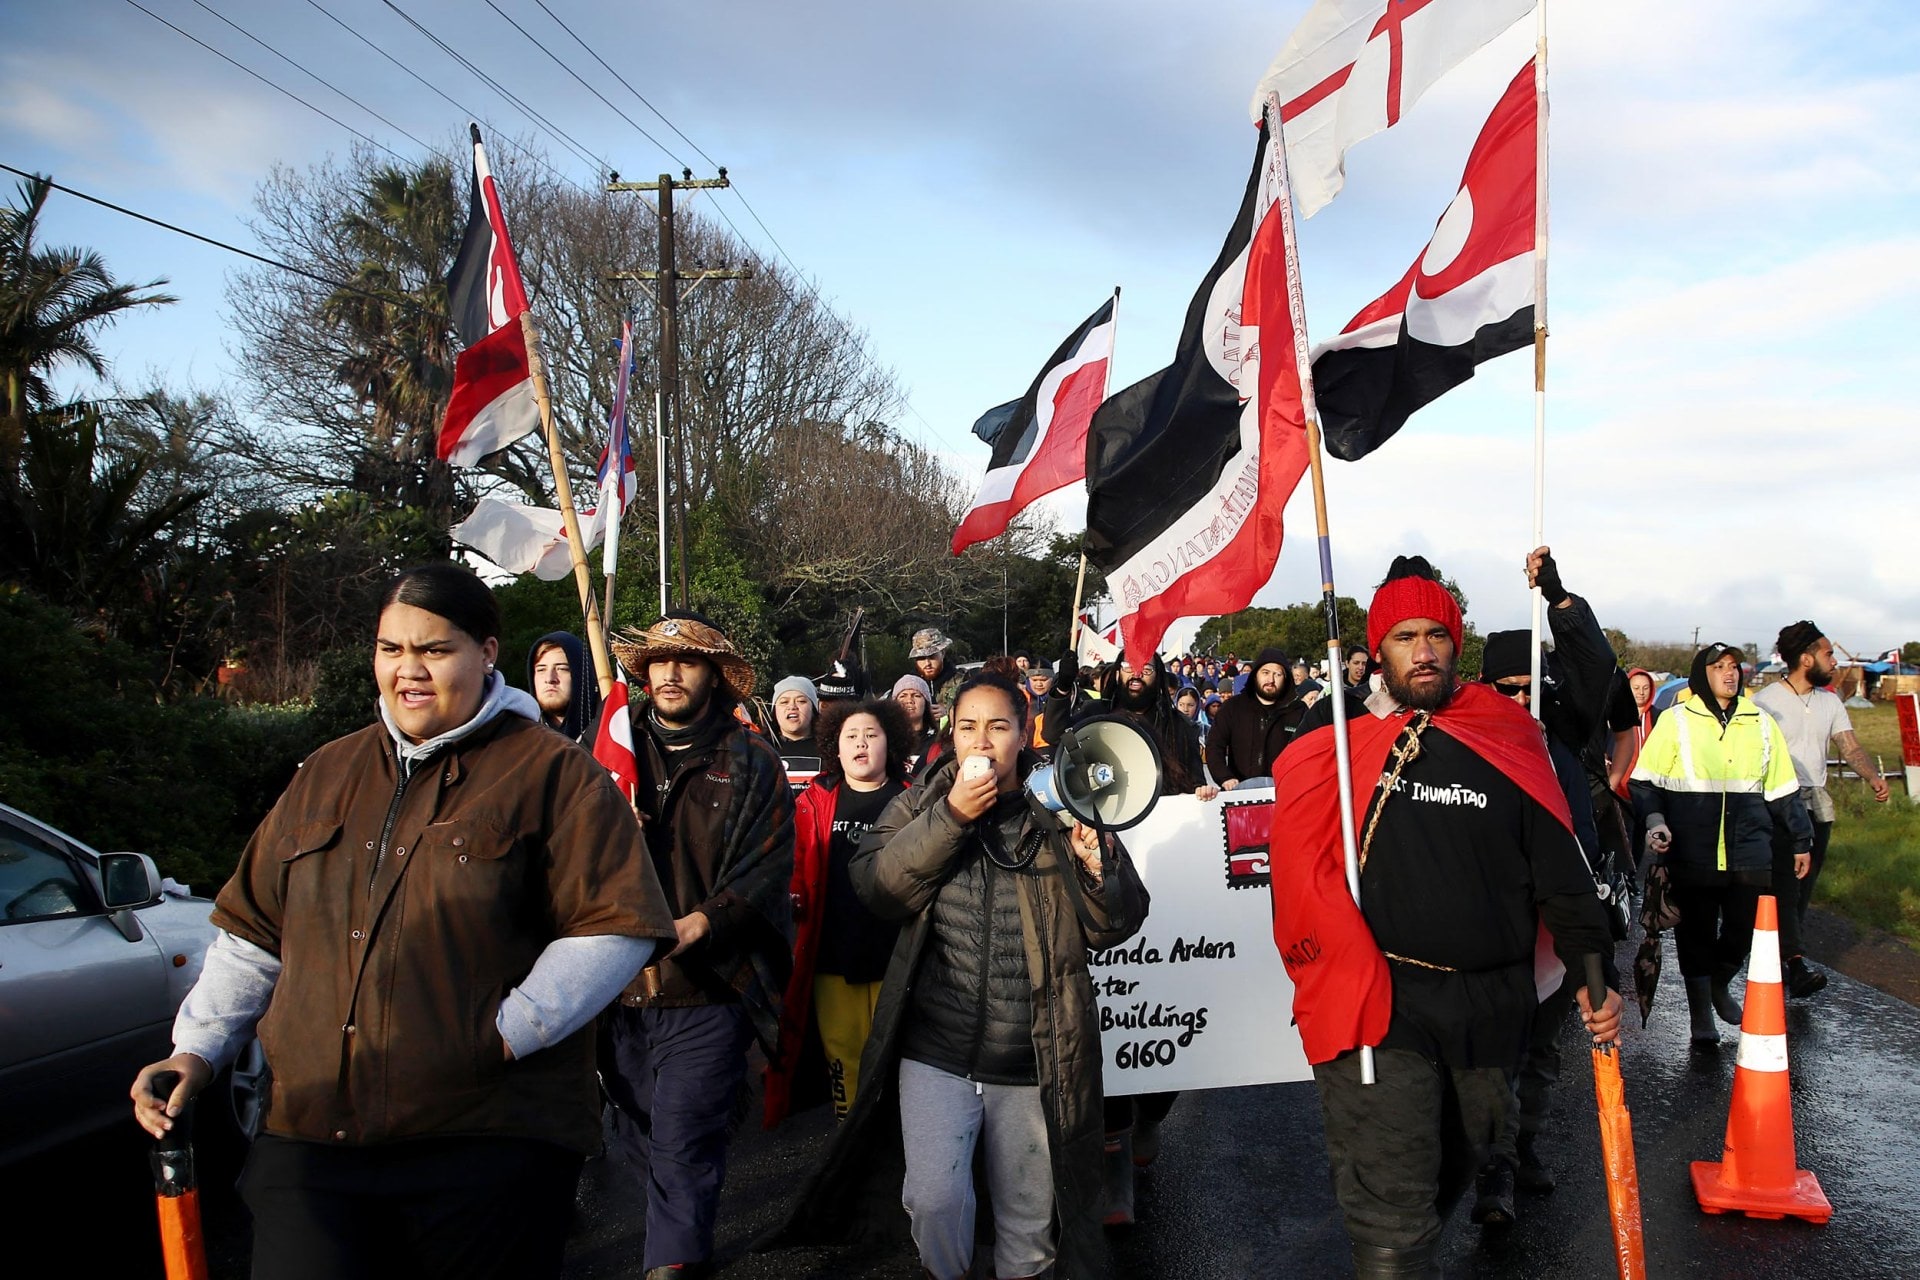 The hikoi departs from Ihumatao to begin the walk to Mt Albert on August 22, 2019 in Auckland, New Zealand. The hikoi (walk) from Ihumātao to Prime Minister Jacinda Ardern's Mt Albert constituency office, is to hand deliver a petition calling for her to visit the land. More than 100 people currently occupy the South Auckland site, opposing a new housing development on the land